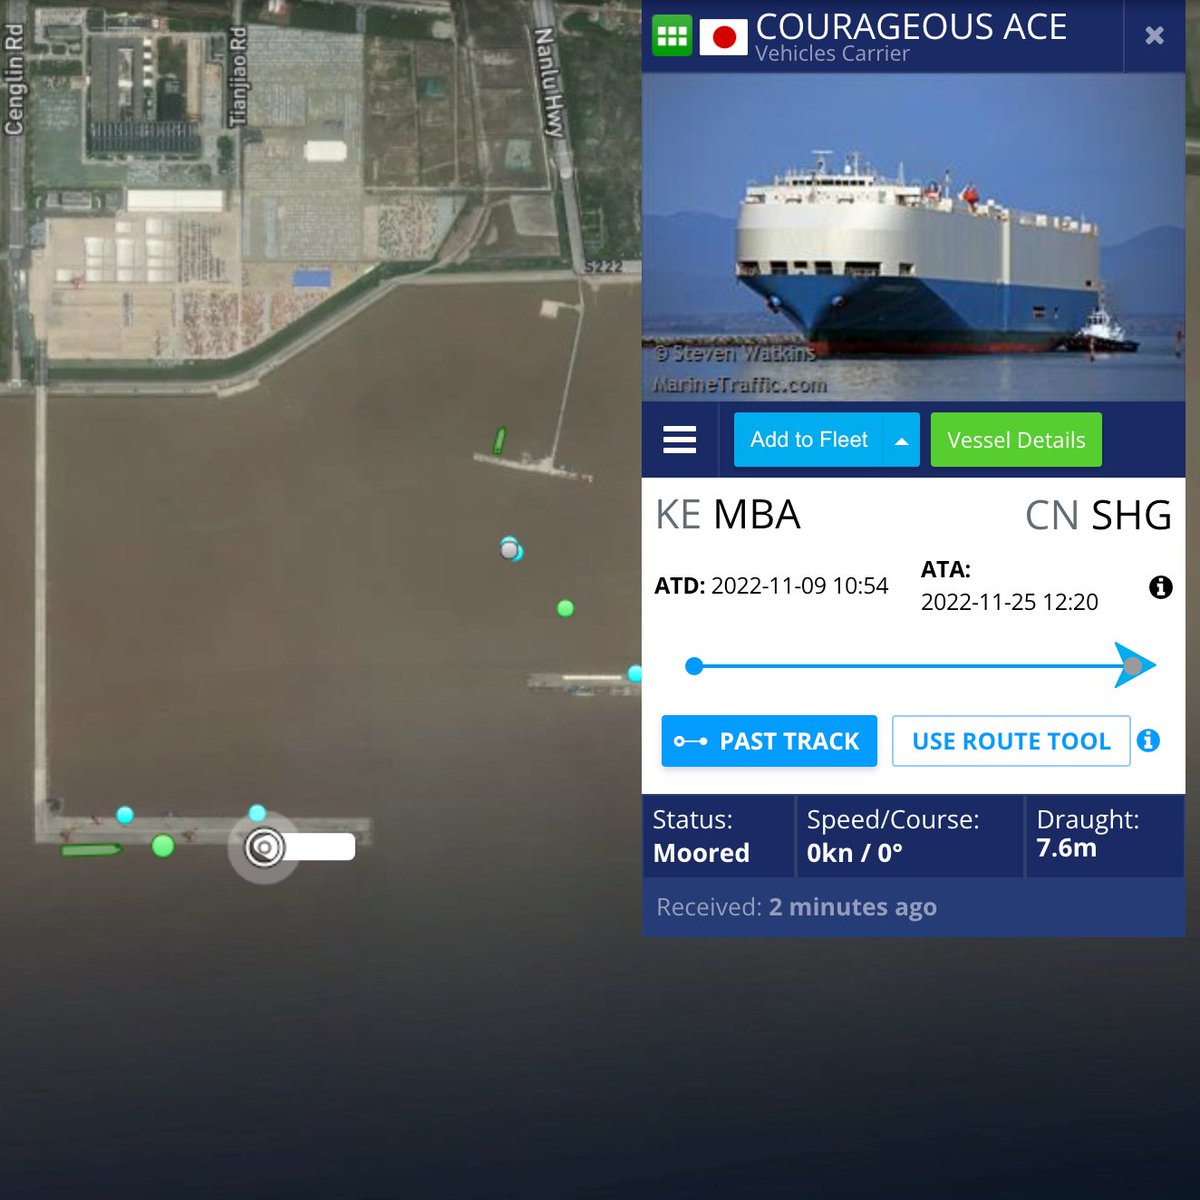 #CourageousAce is the next international ship loading Teslas at Shanghai Luchao port

#23 ship in Q4
(#0 from )

$TSLA #Tesla #Model3 #ModelY #TeslaCarriers
bit.ly/TeslaCarriers